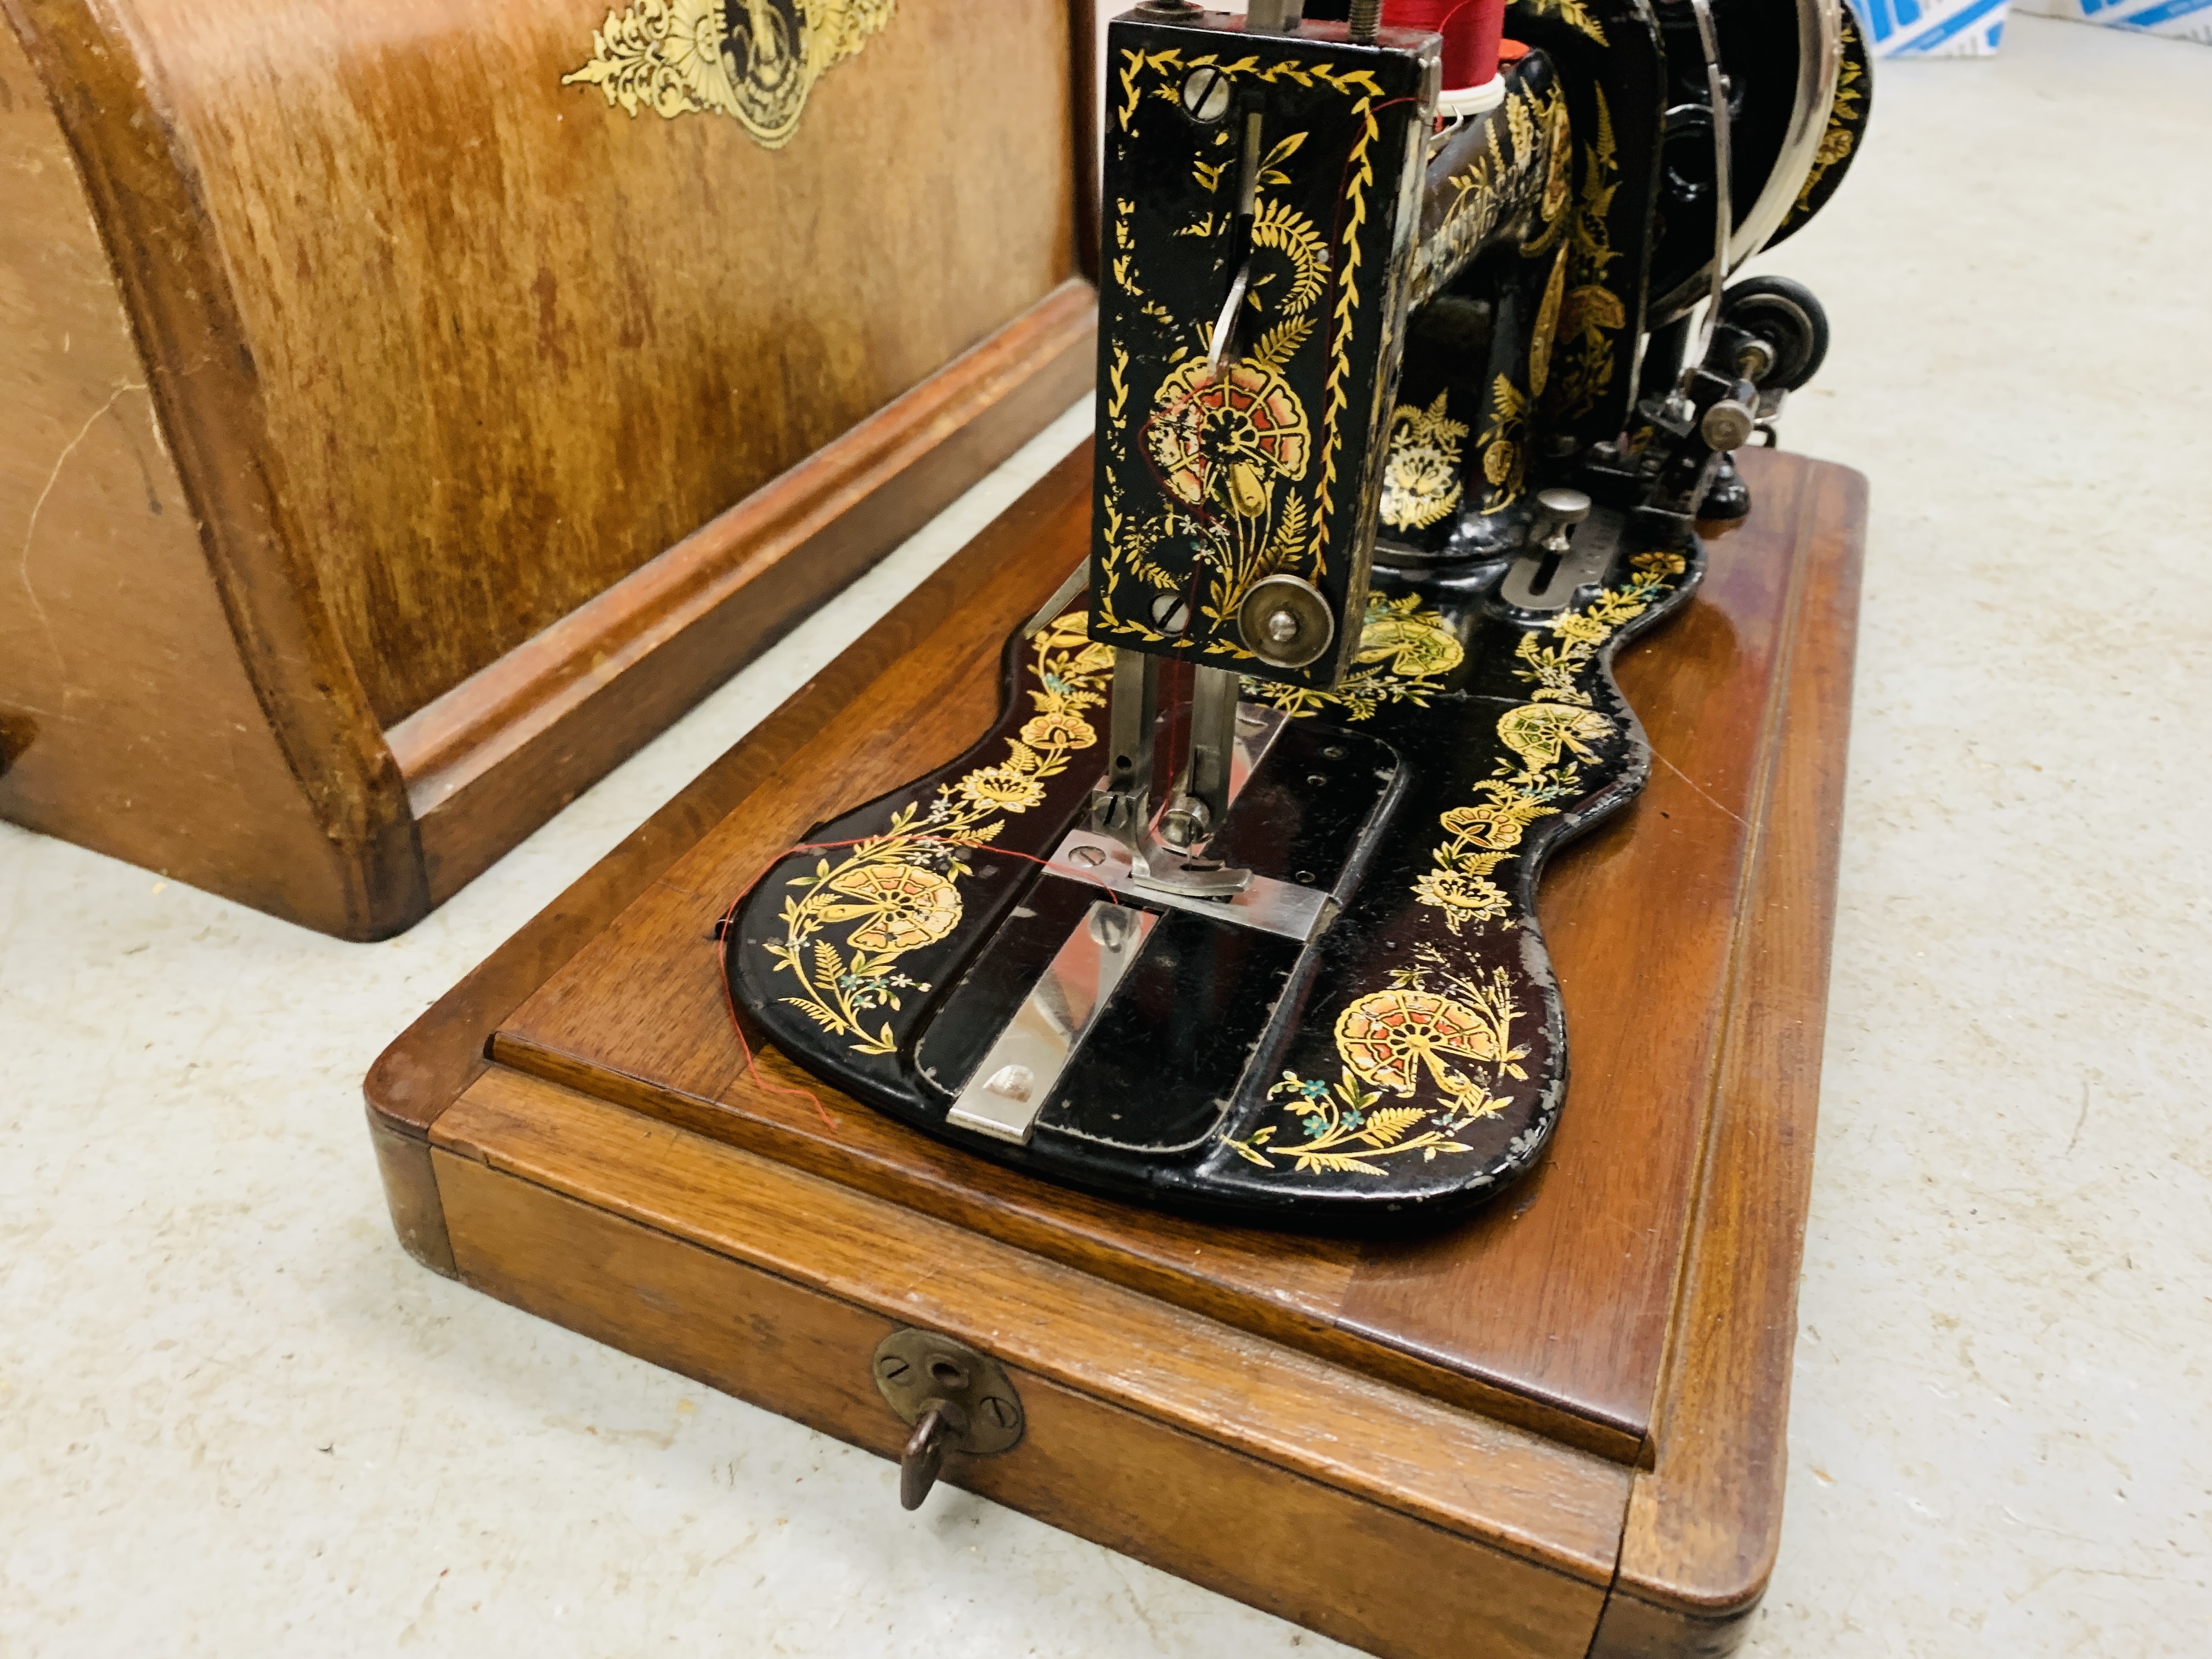 A VINTAGE SINGER GILT DECORATED MANUAL SEWING MACHINE UNDER ORIGINAL DOMED COVER - Image 6 of 6